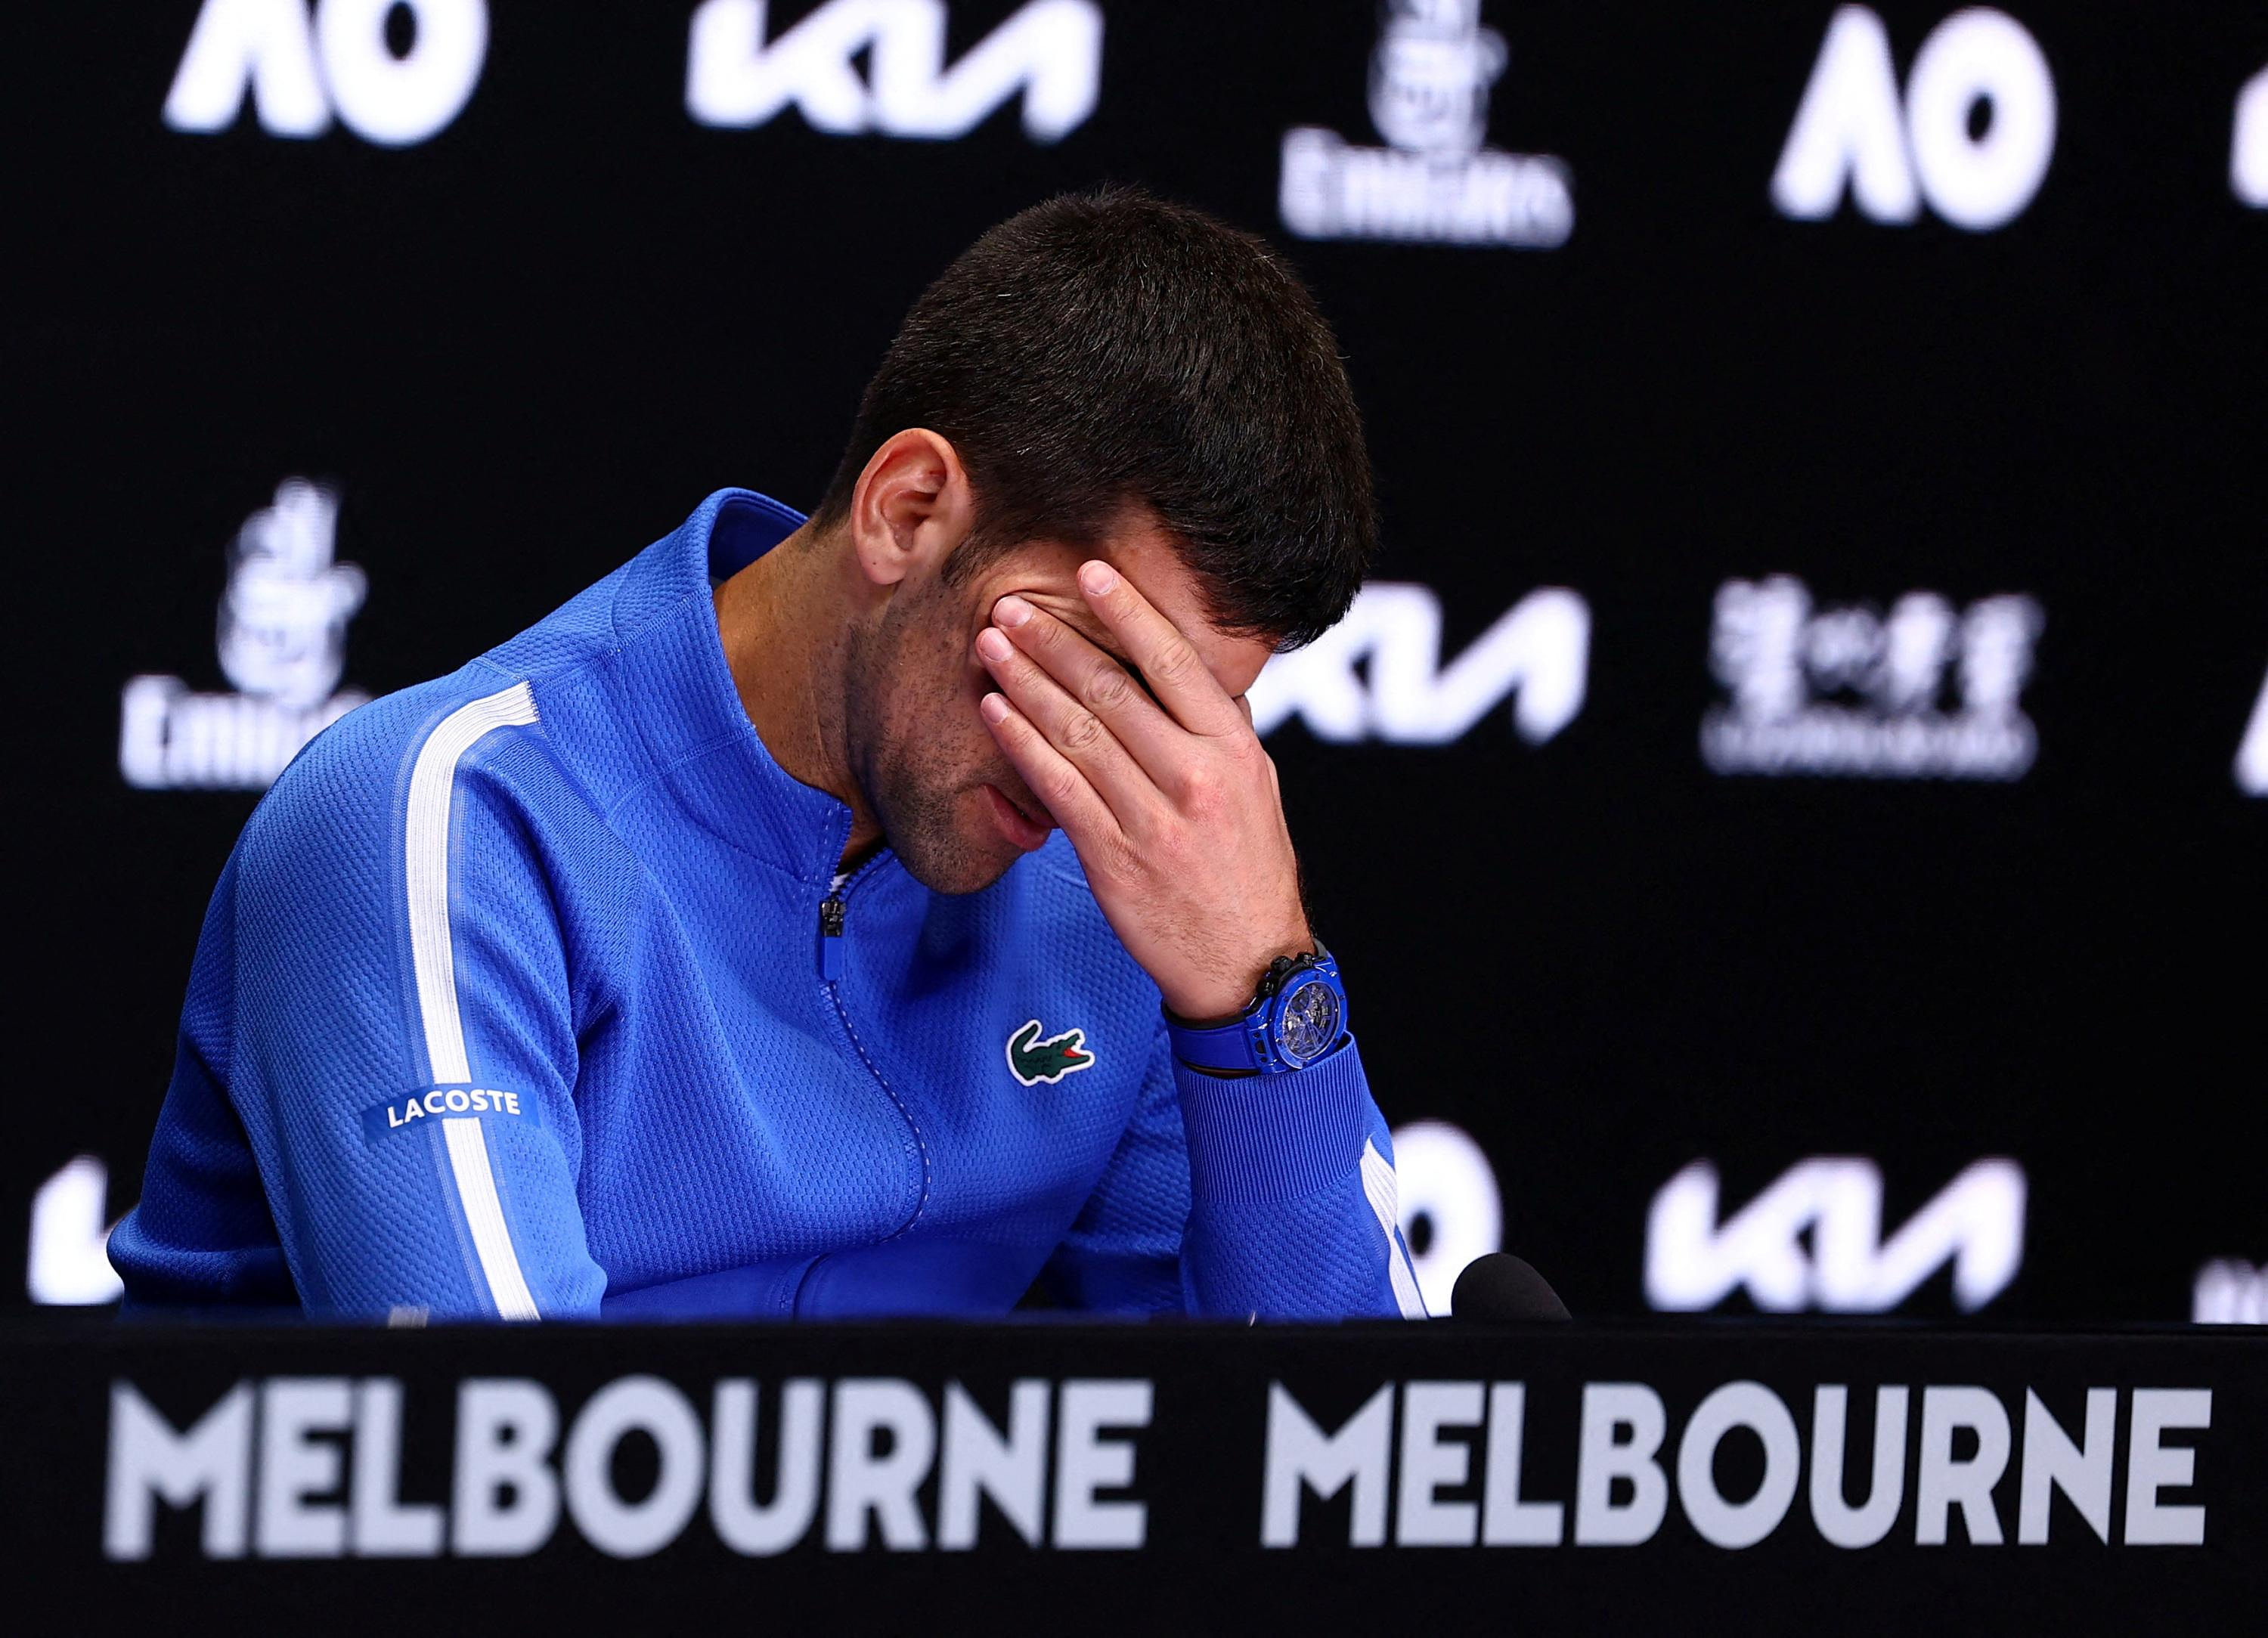 Australian Open: Djokovic believes he played “one of his worst Grand Slam matches”